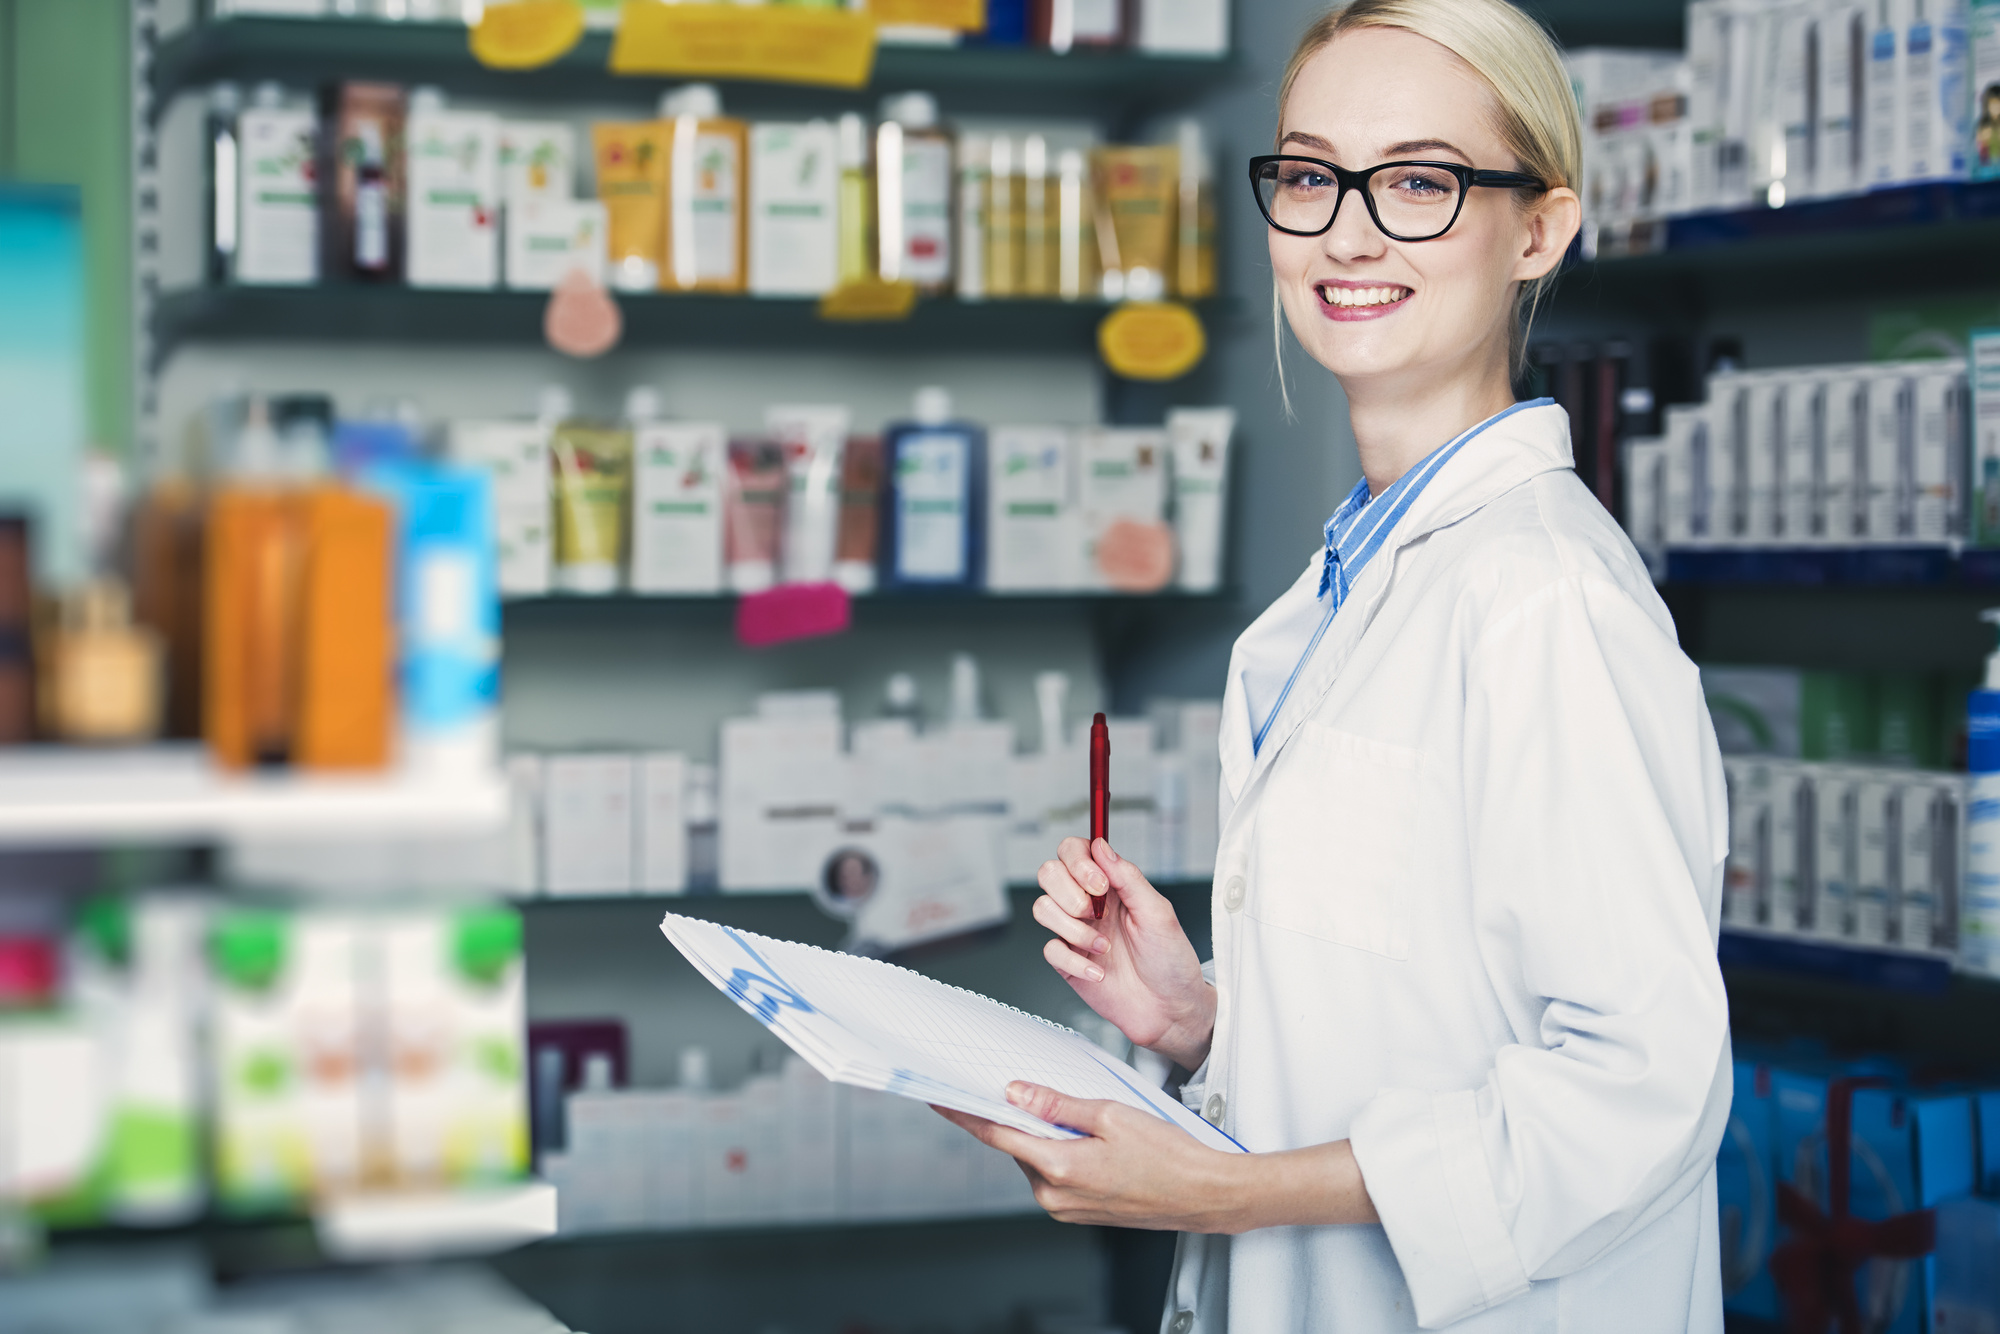 A Guide to Understanding the Requirements of an Inpatient Pharmacy Tech